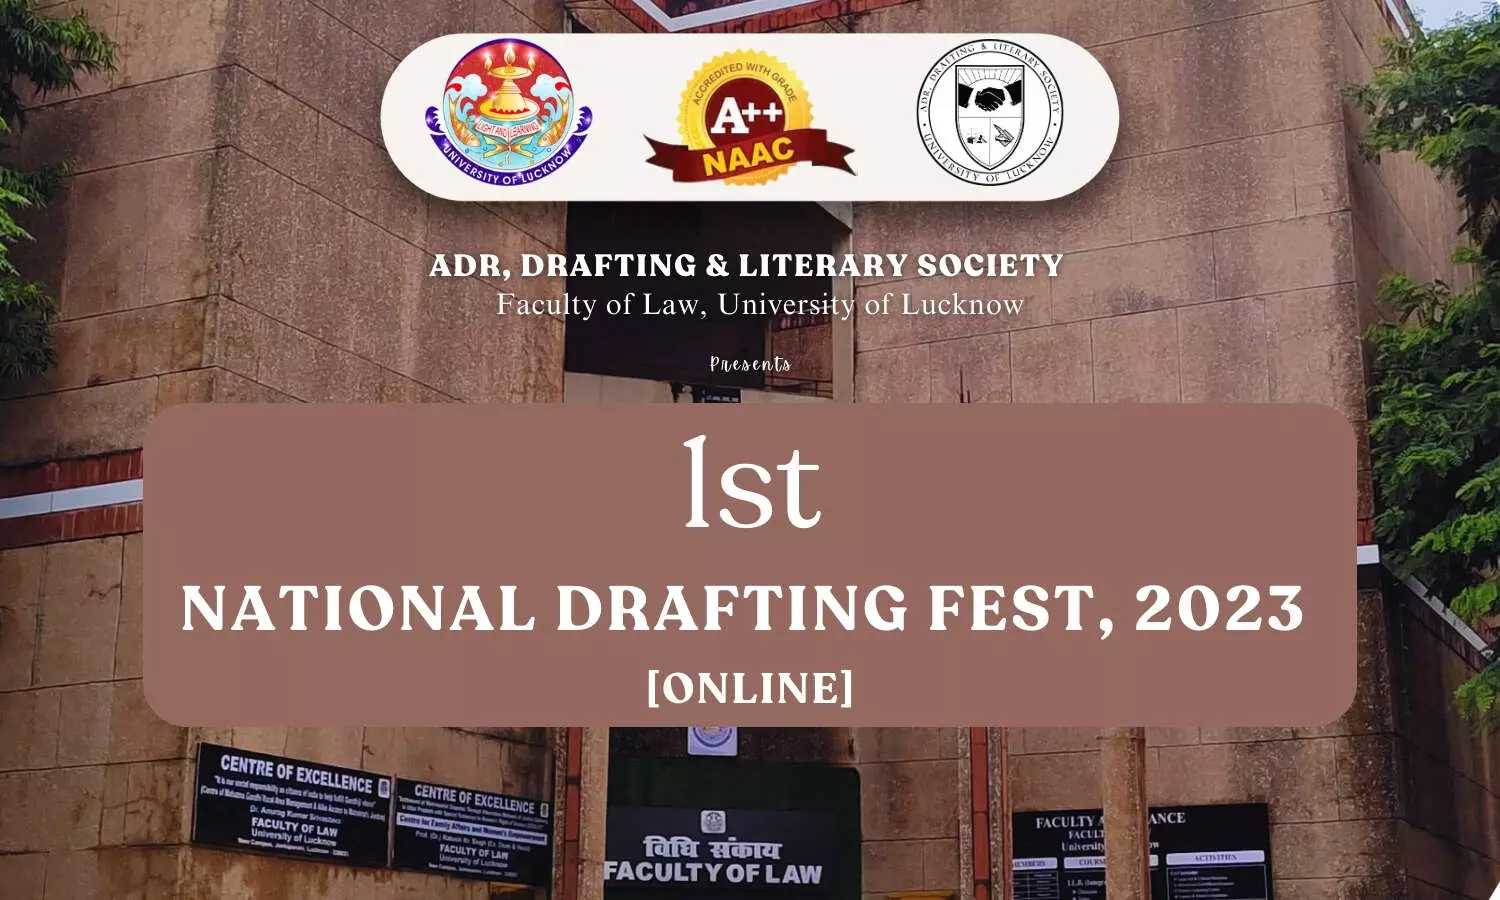 1st National Drafting Fest 2023 | Faculty of Law, University of Lucknow